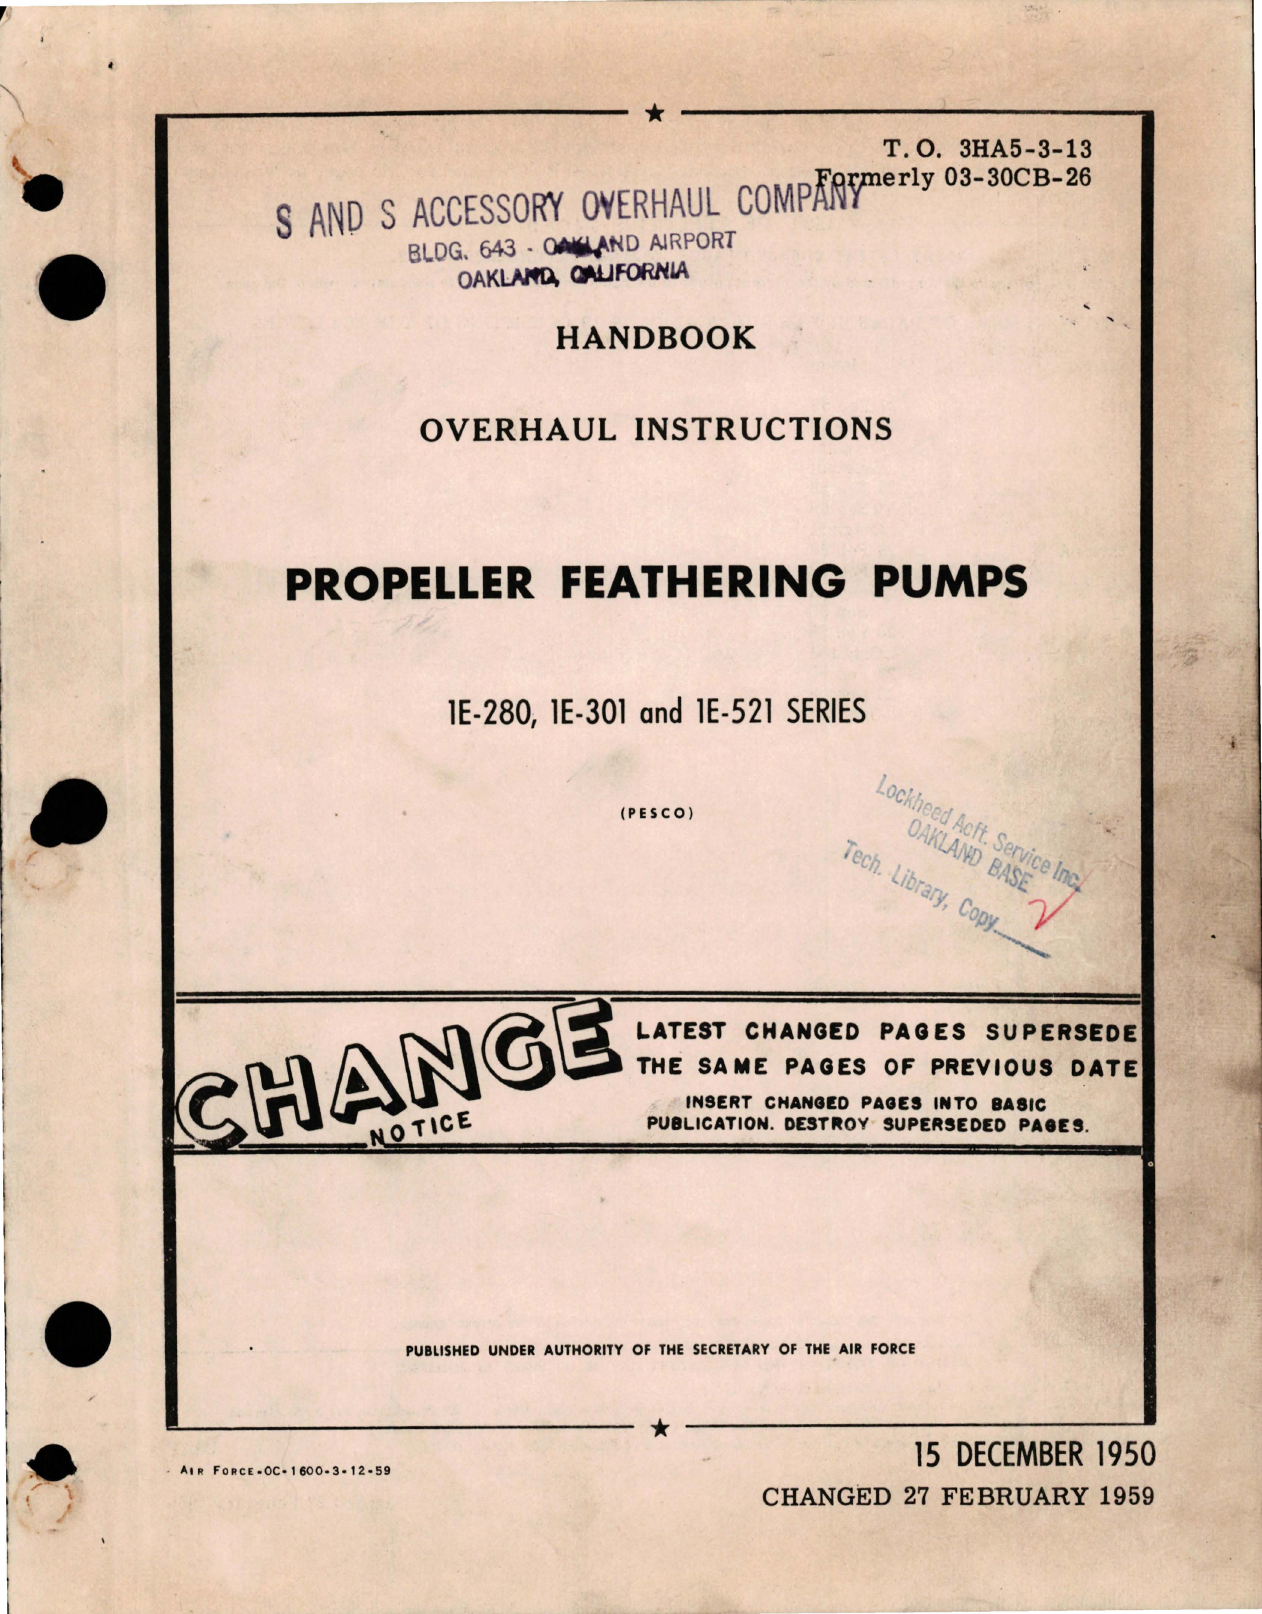 Sample page 1 from AirCorps Library document: Overhaul Instructions for Propeller Feathering Pumps - 1E-280, 1E-301, 1E-521 Series